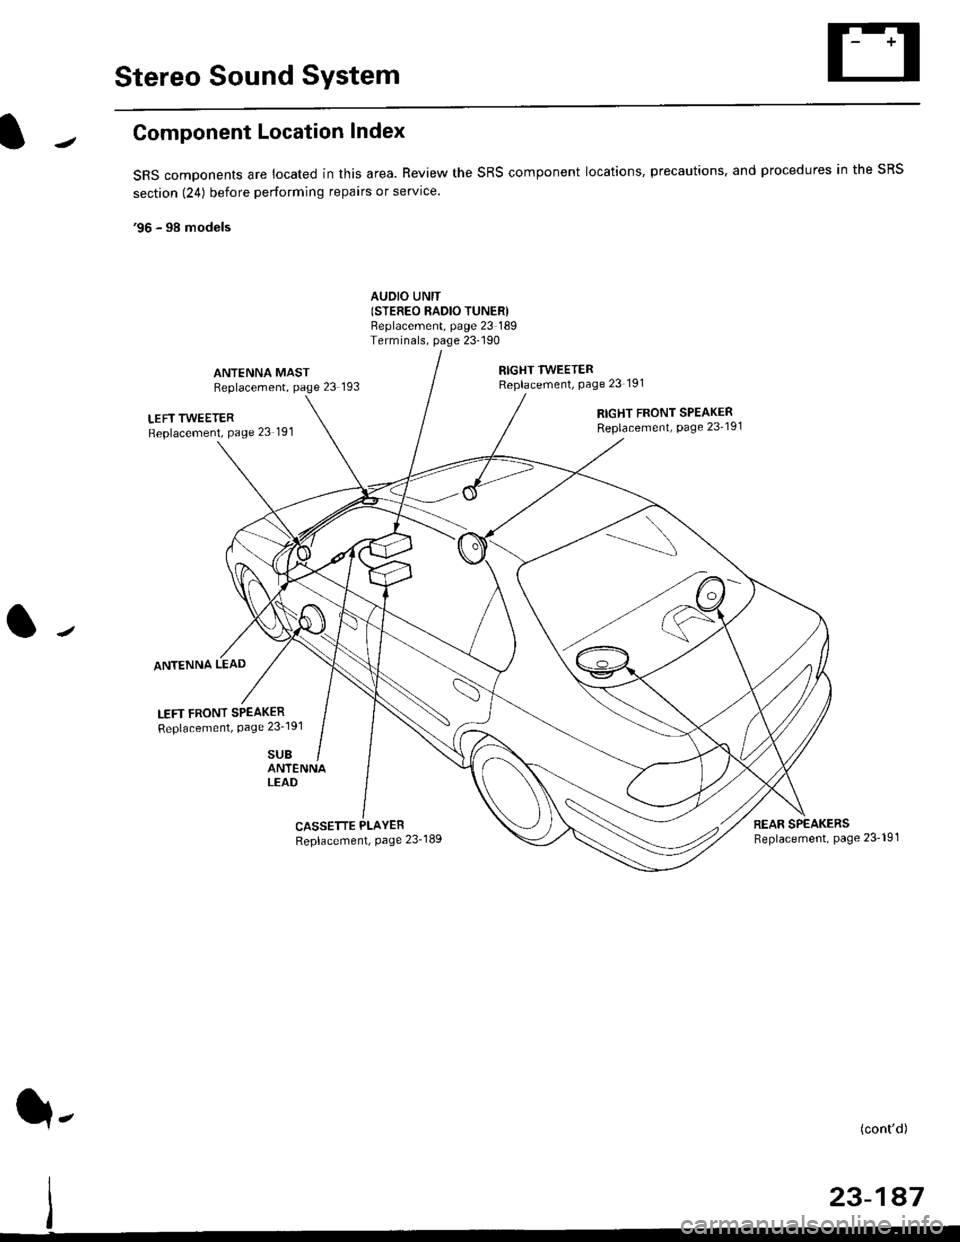 HONDA CIVIC 1998 6.G Workshop Manual Stereo Sound System
Component Location Index
SRS components are located in this area. Review the SRS component locations, precautions. and procedures in the SRS
section (24) before performing repairs 